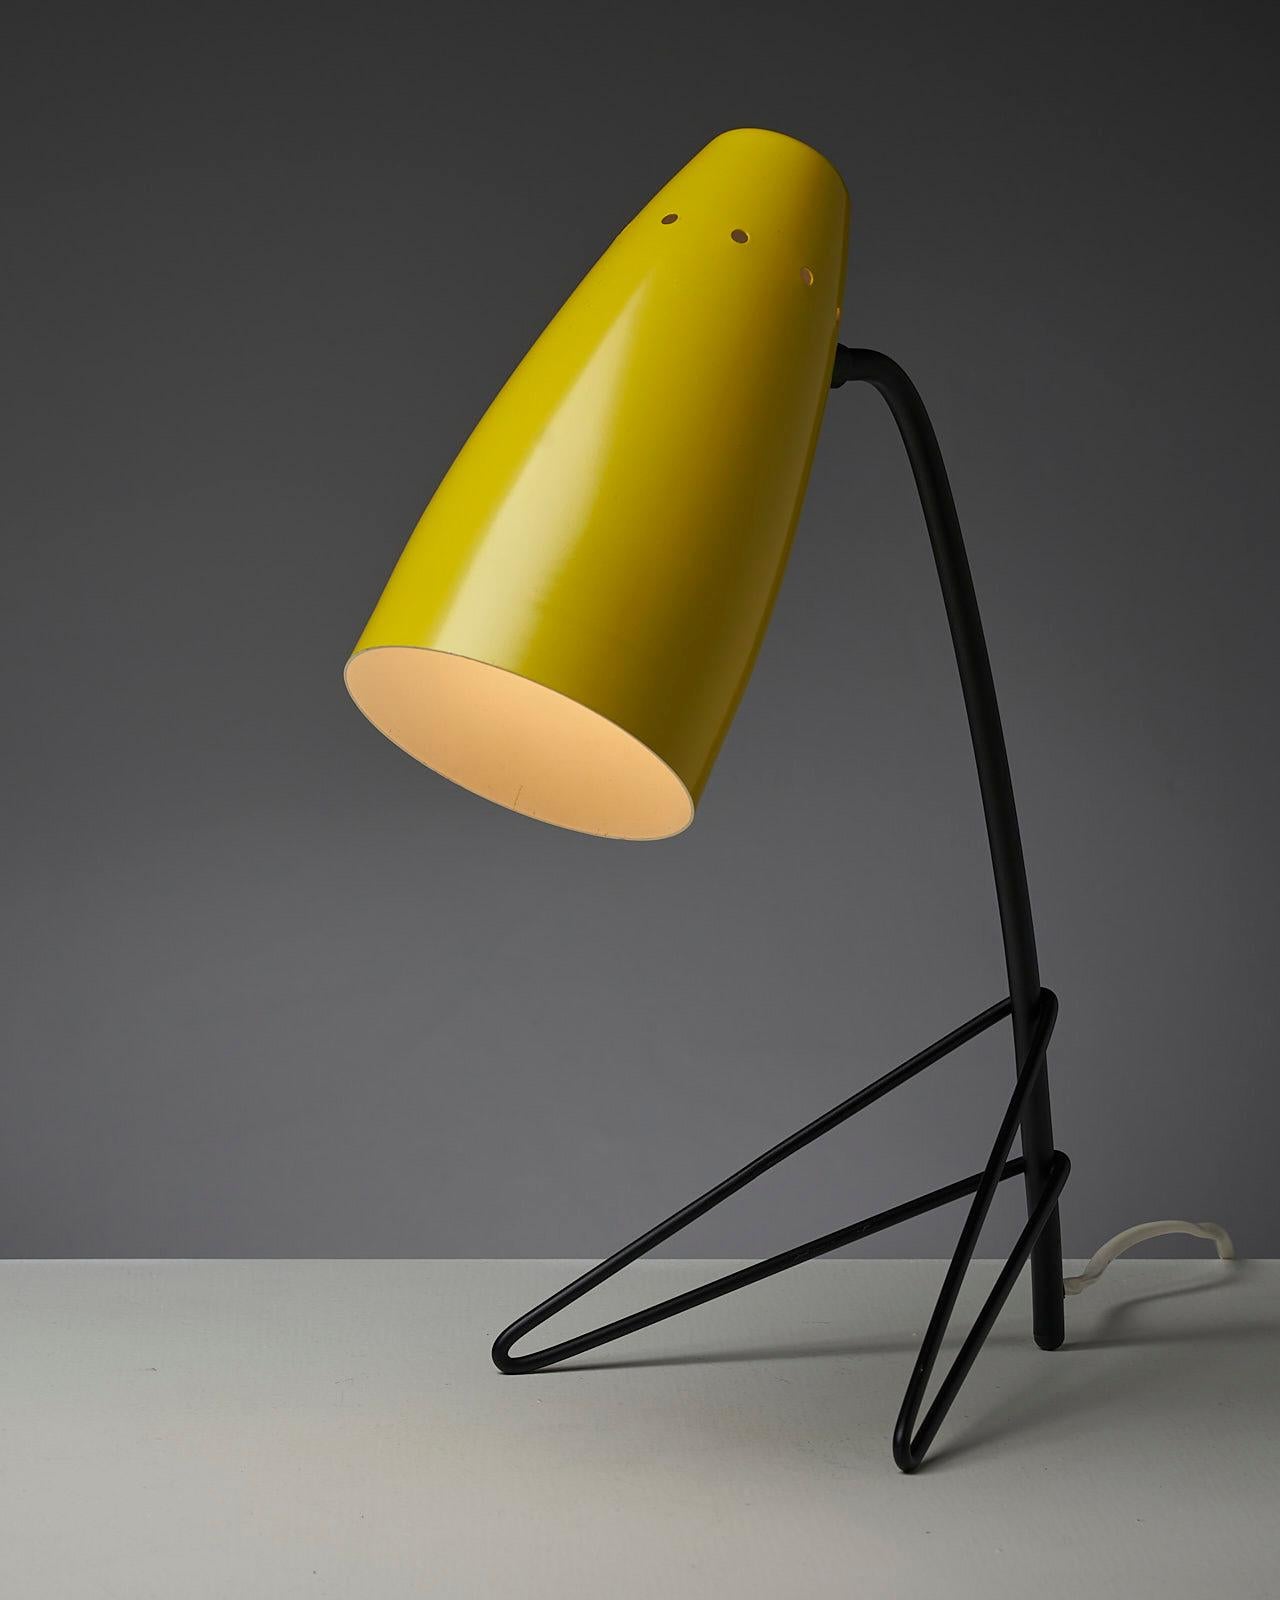 The Yellow Grasshopper is a playful and eye-catching table lamp that features a unique and distinctive design. The metal lampshade is lacquered in a vibrant yellow, which adds a pop of color to any room. The tripod base with hairpin legs is made of